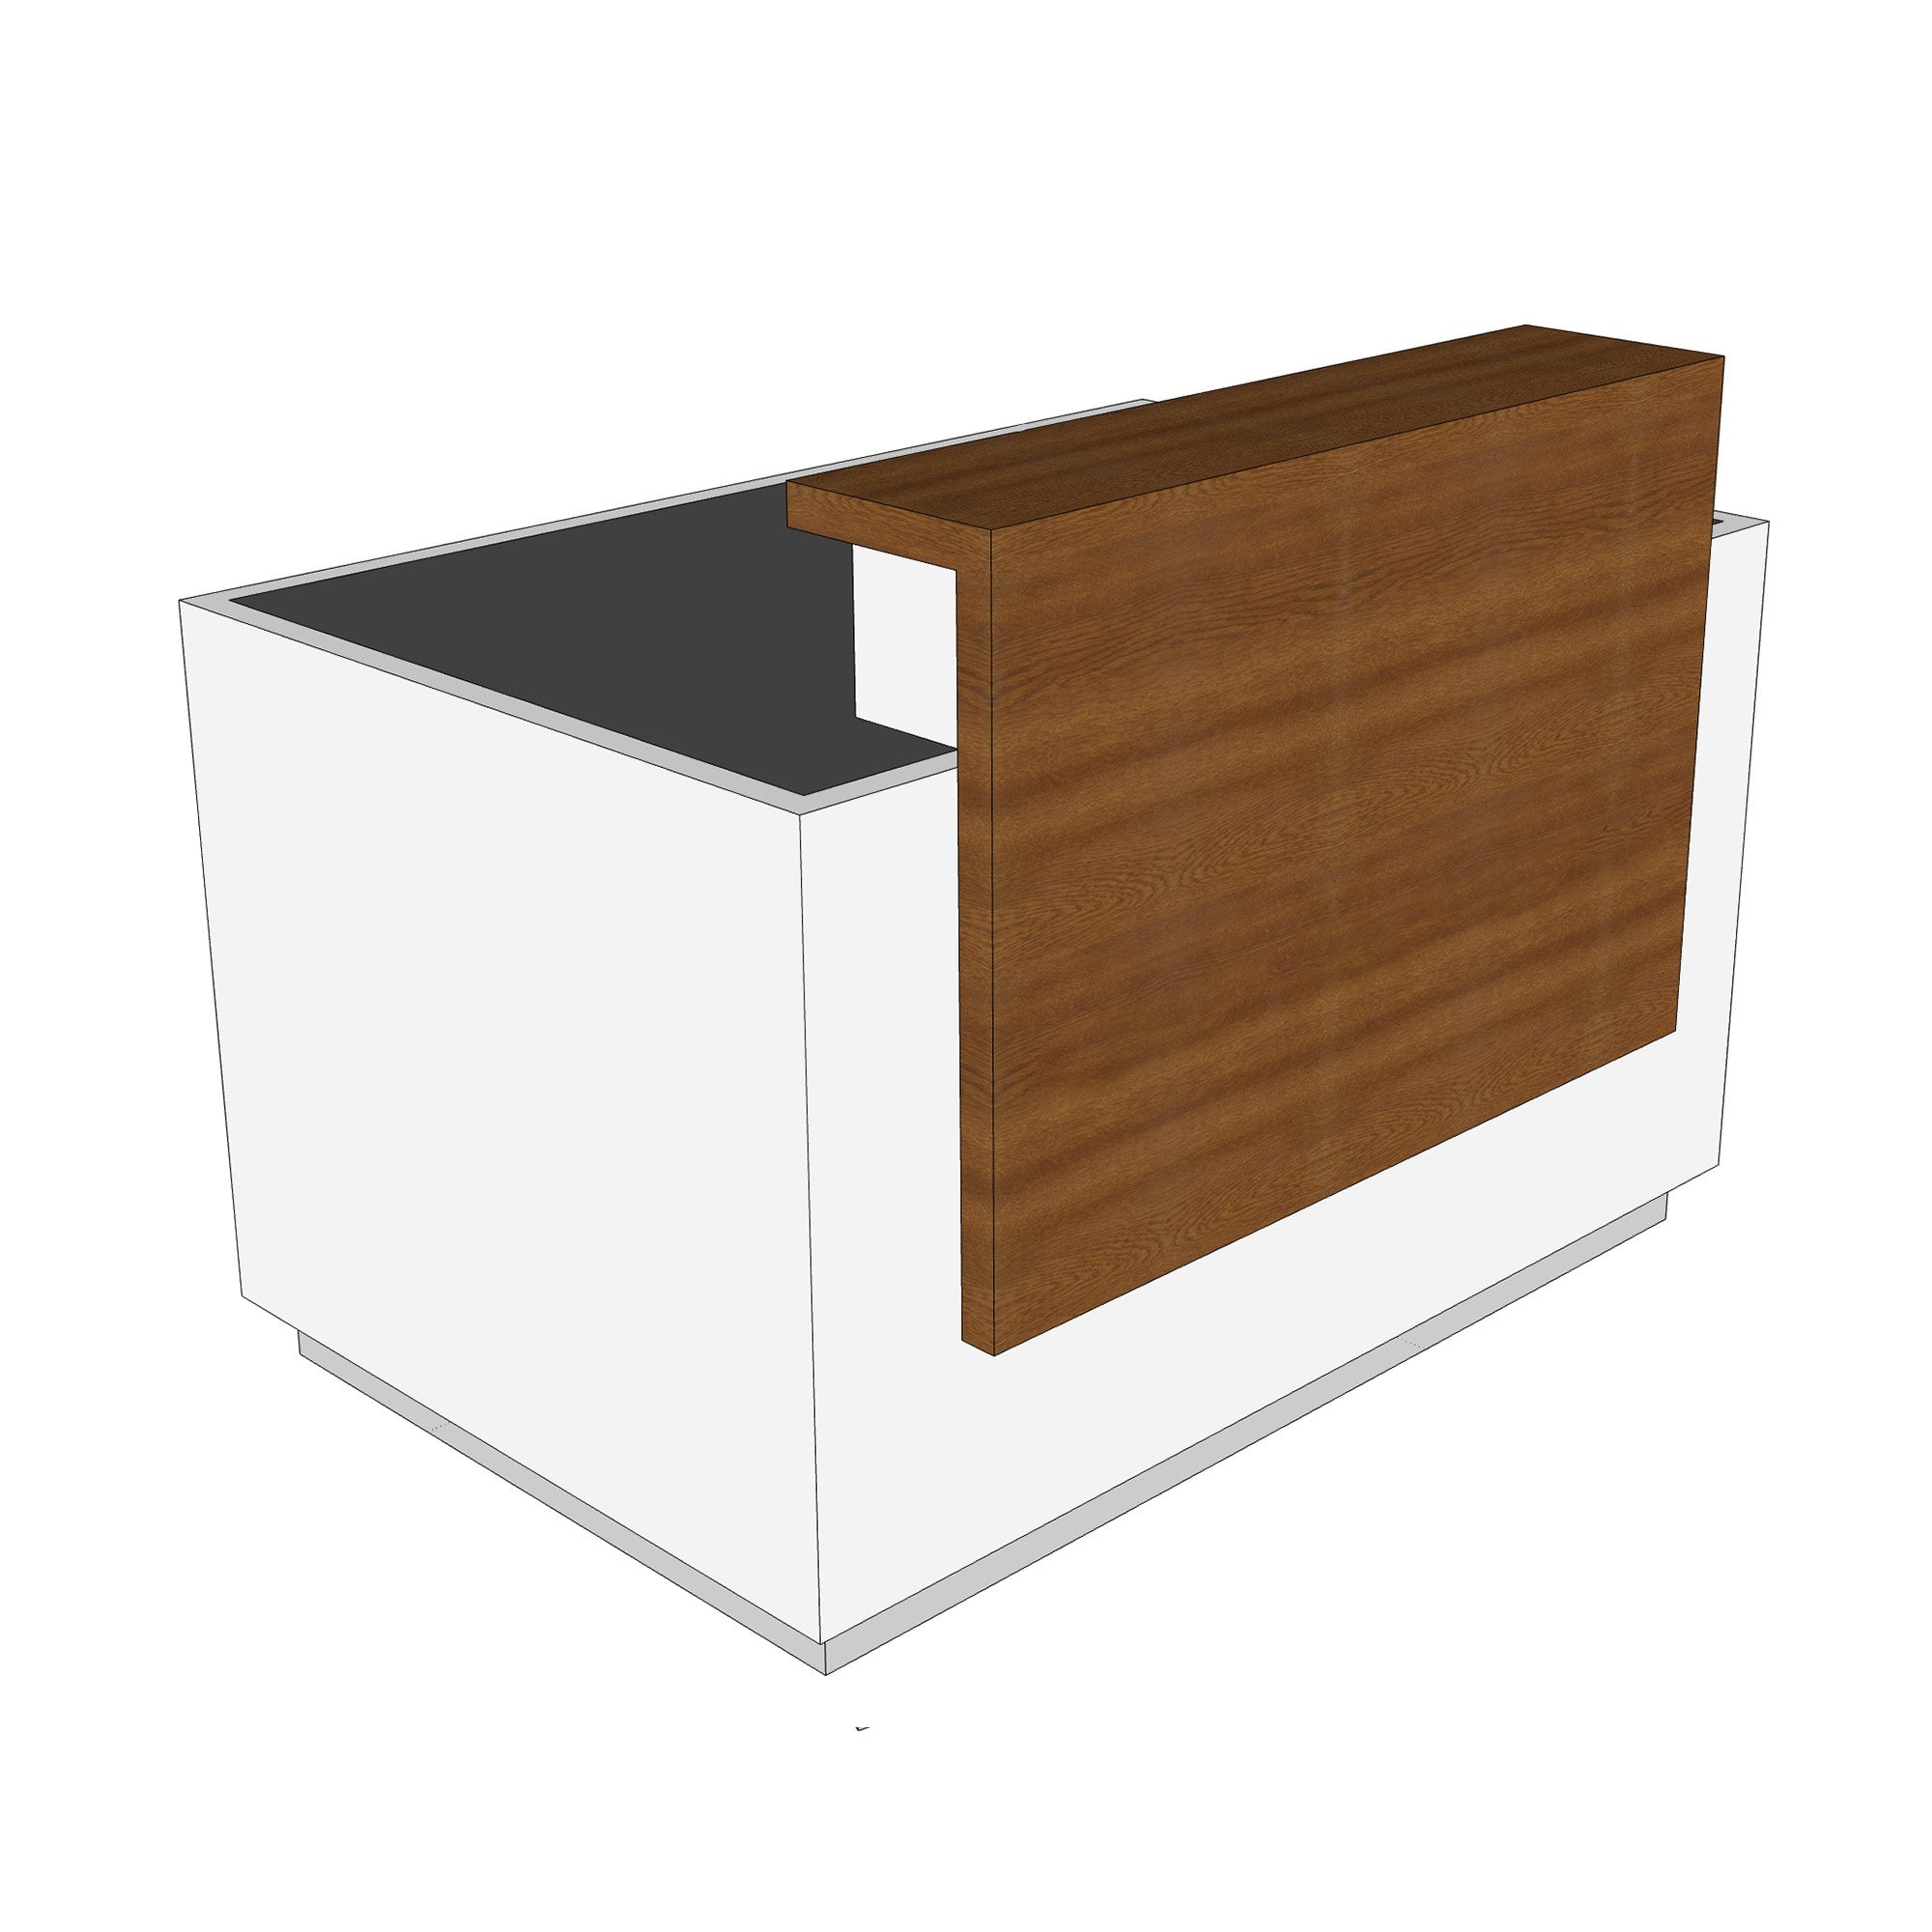 Retail Store Rectangular Luxury Reception Desk With Drawers